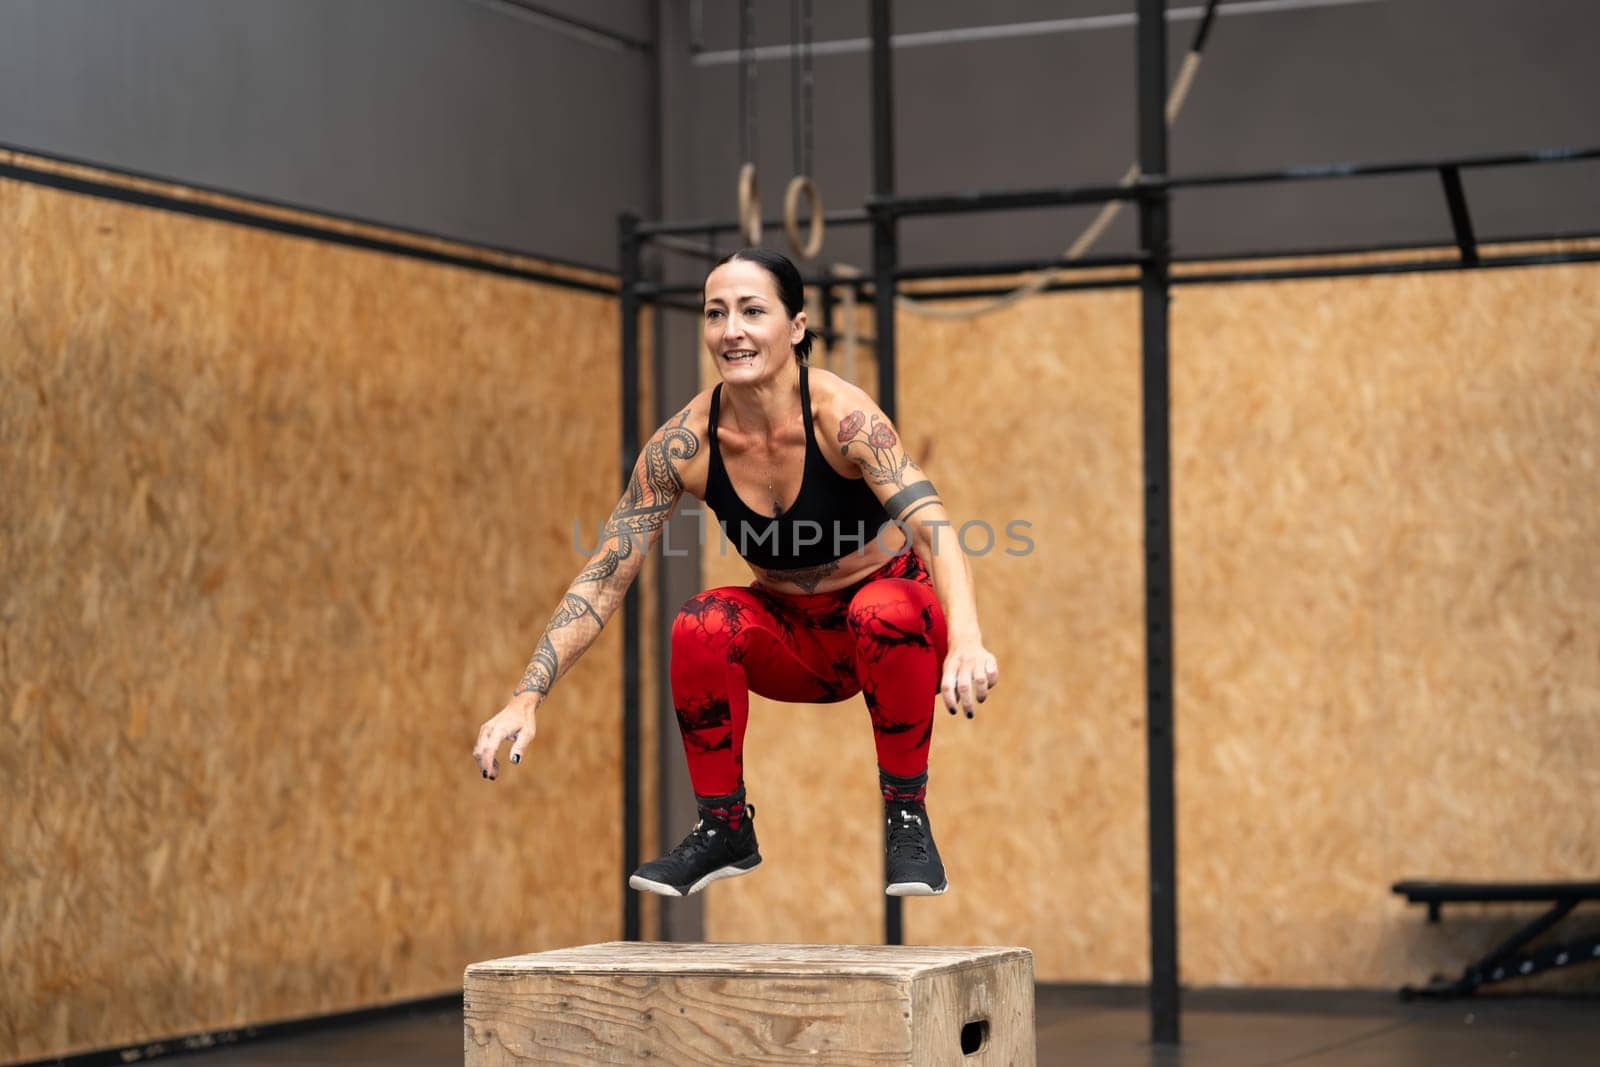 Mature woman jumping into box in a gym by javiindy